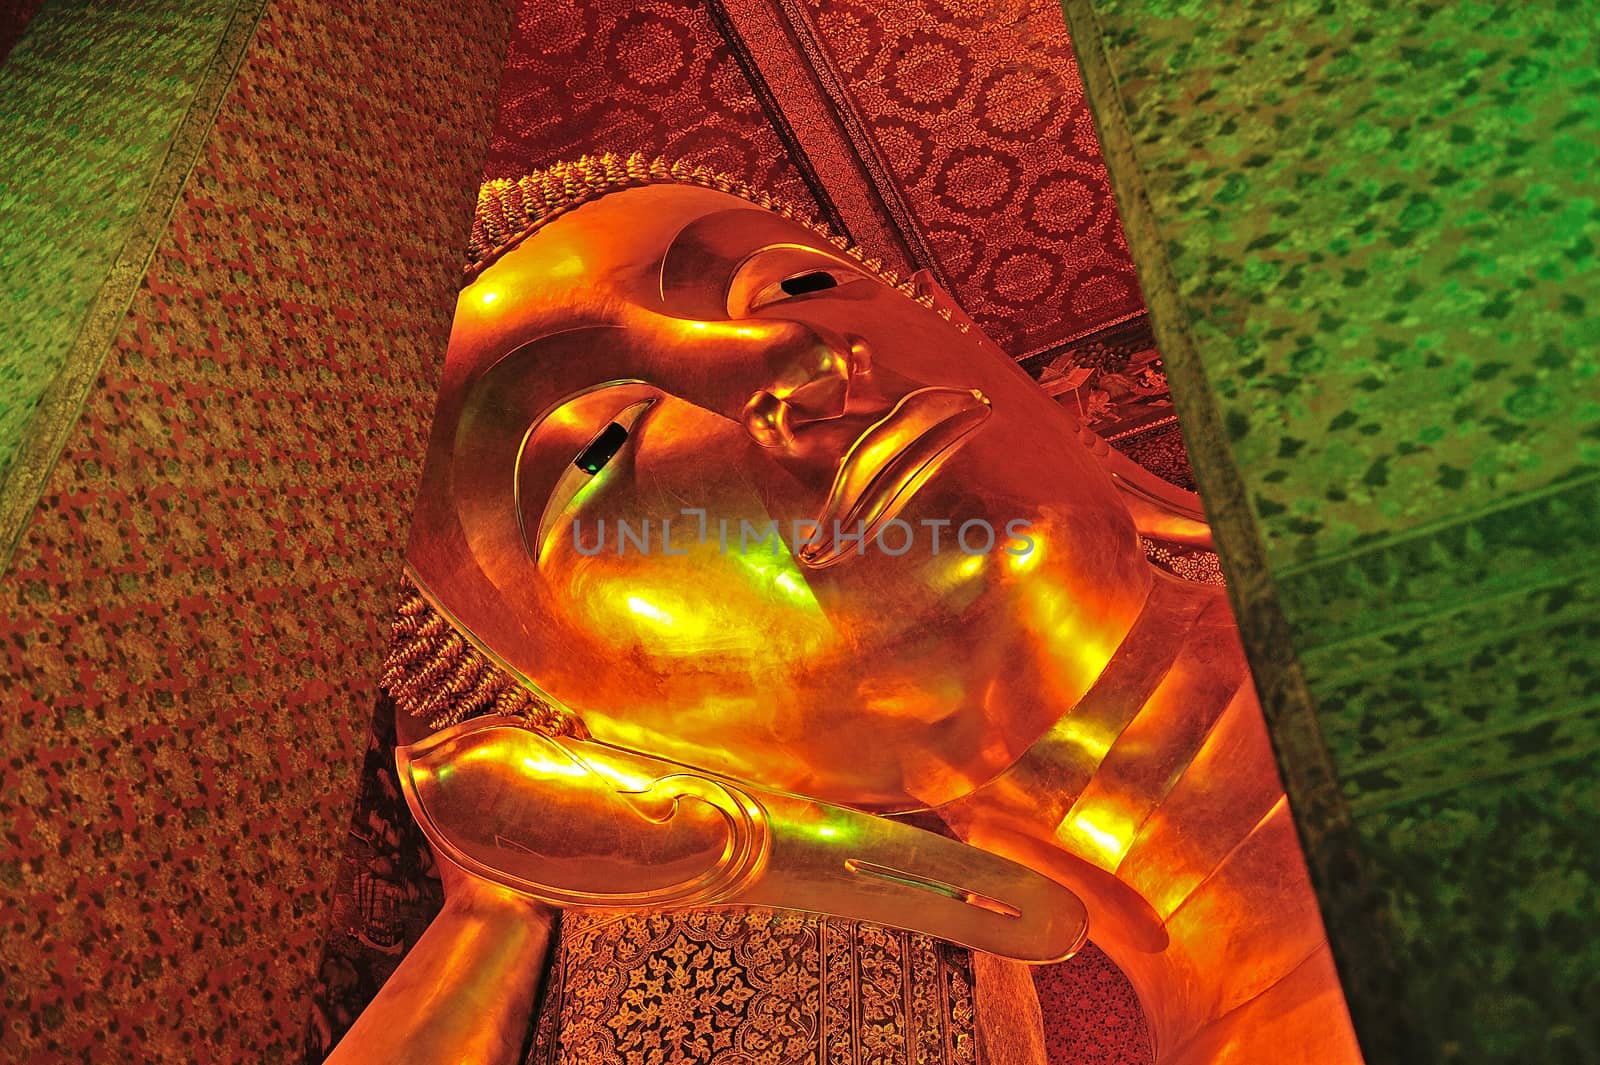 The face of Reclining Buddha statue in Thailand Buddha Temple Wat PO